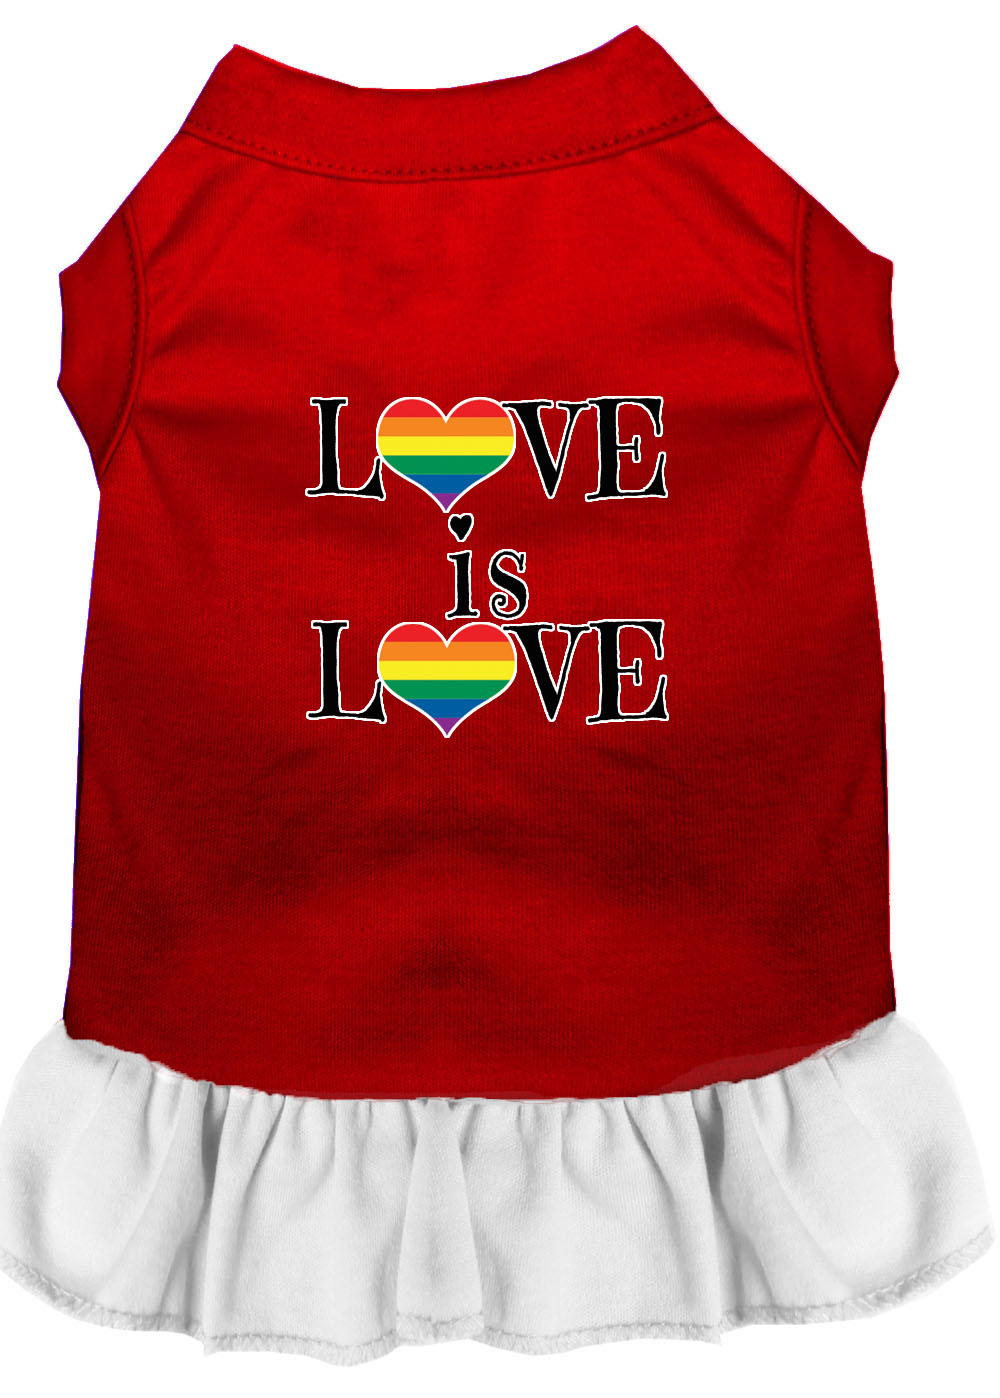 Love is Love Screen Print Dog Dress Red with White XL